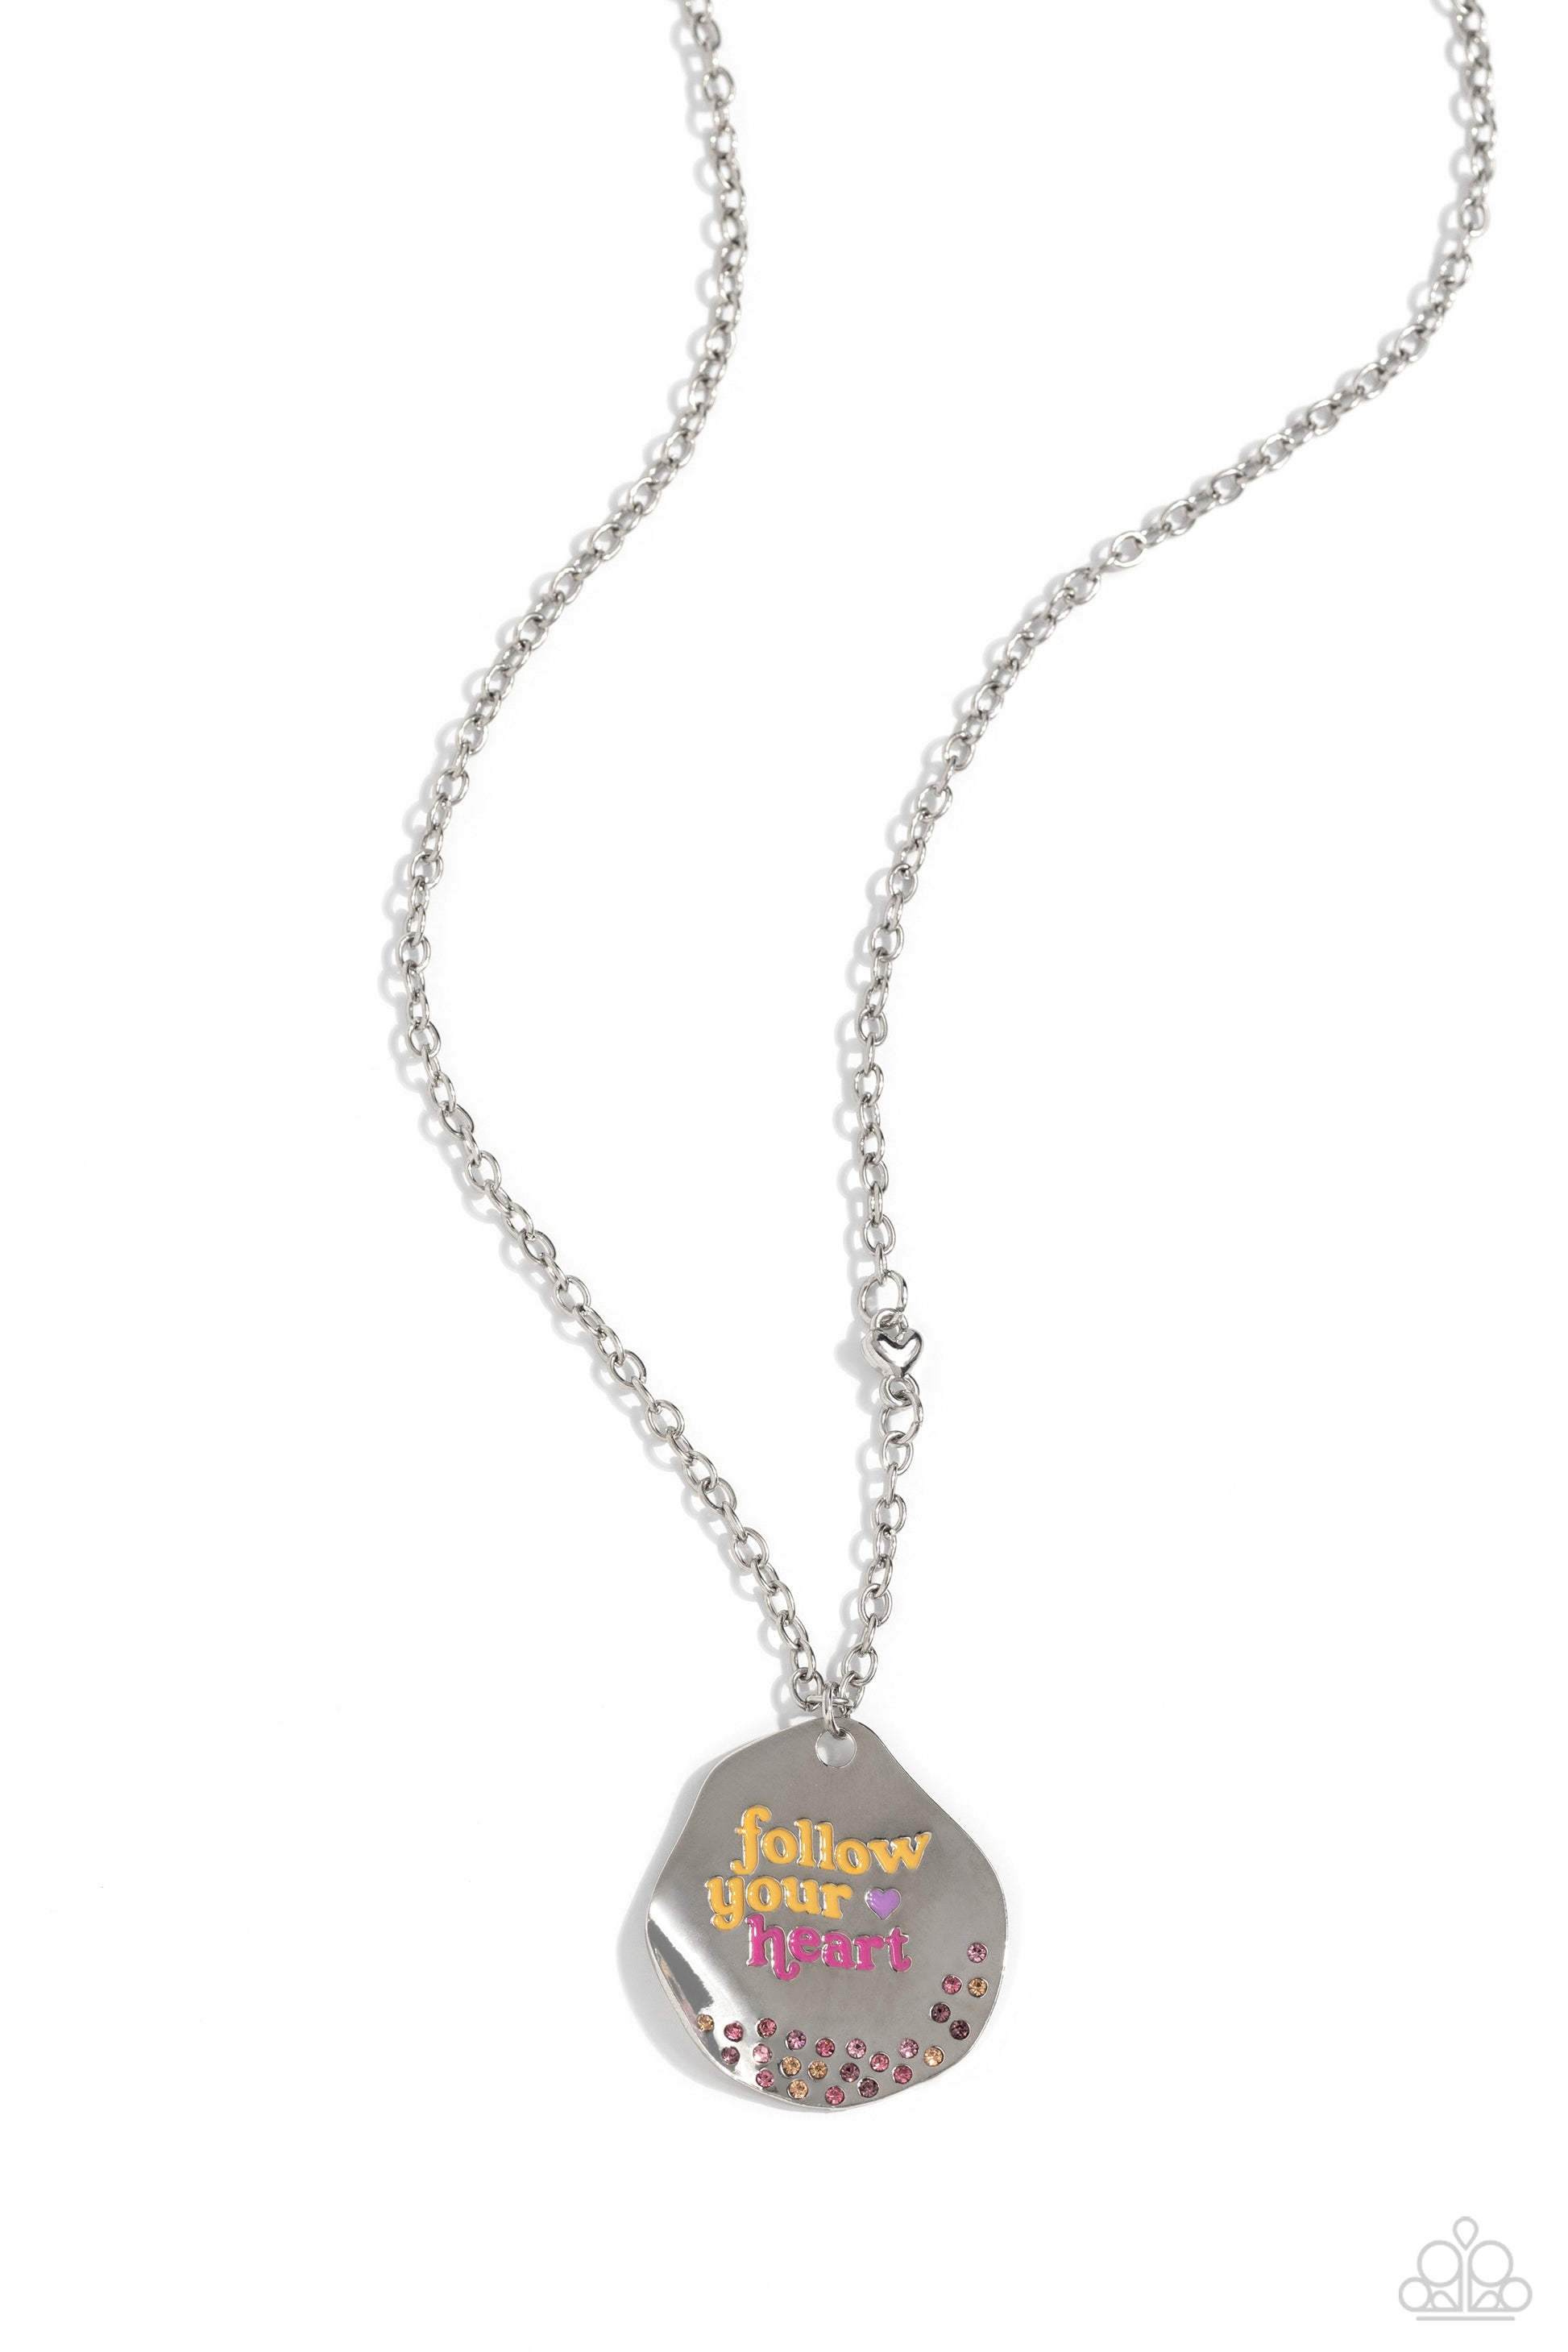 Honor Your Heart - multi - Paparazzi necklace